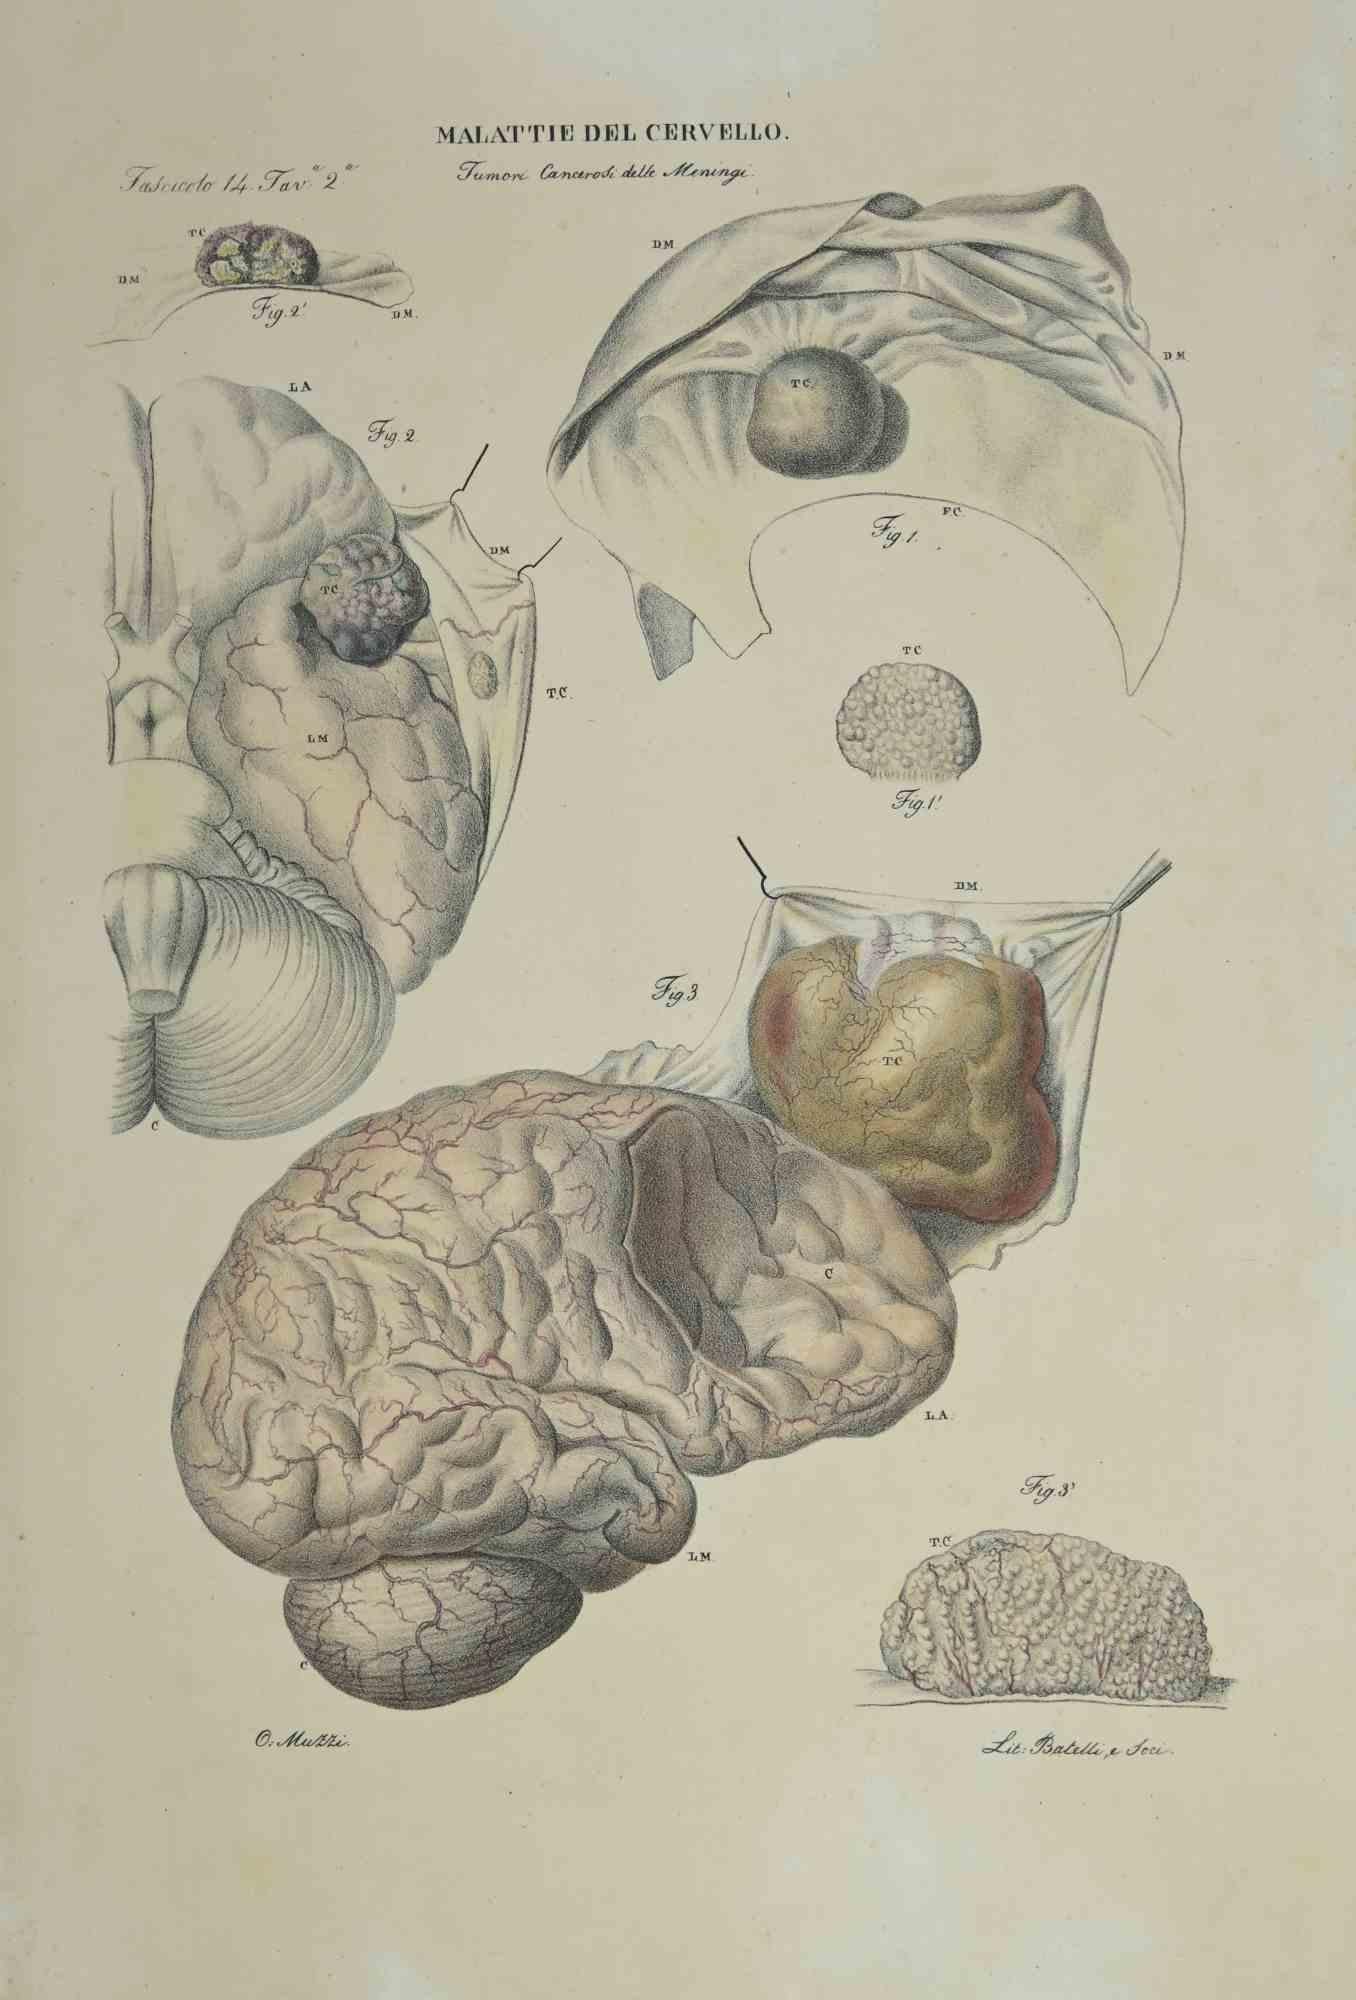 Brain Diseases is a lithograph hand colored by Ottavio Muzzi for the edition of Antoine Chazal,Human Anatomy, Printers Batelli and Ridolfi, realized in 1843.
Signed on plate on the lower left margin. 

The artwork belongs to the "Atlante Generale